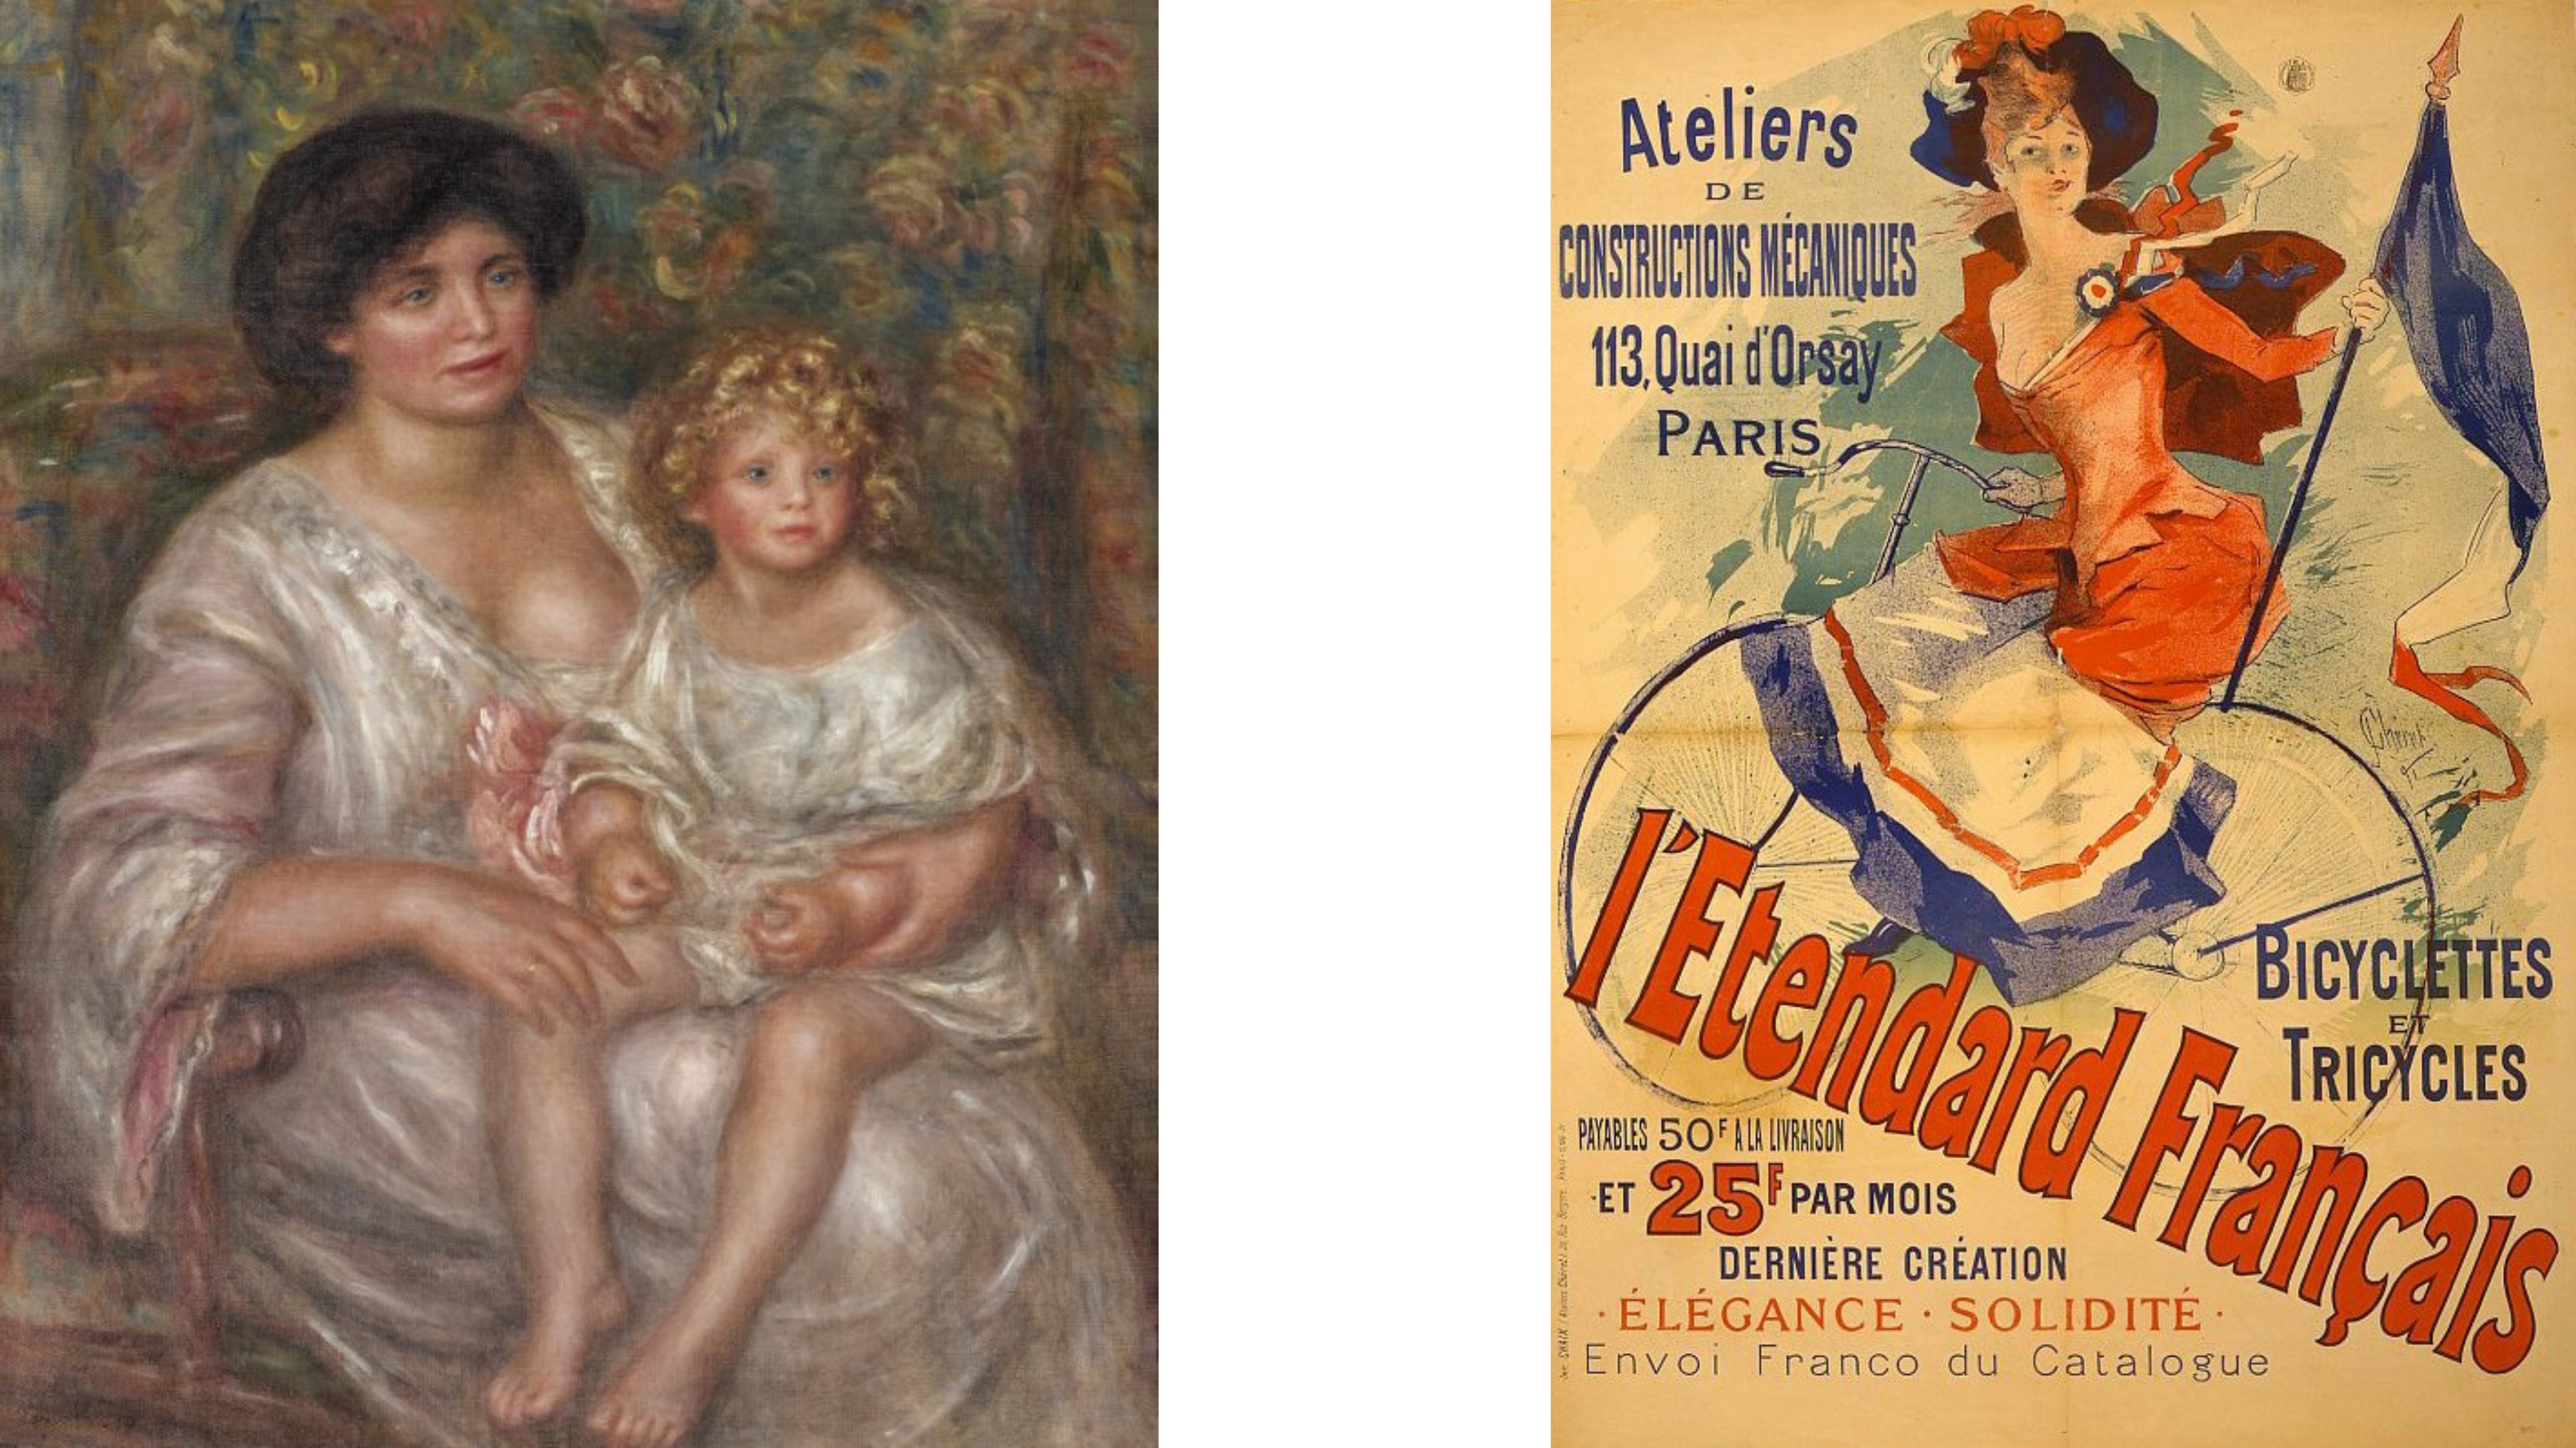 An oil painting of a woman in white, dark hair, and a light skin tone holding a child in white, with blonde curly hair and a light skin tone, with a floral background and an image to the right of a vintage french suffragette poster